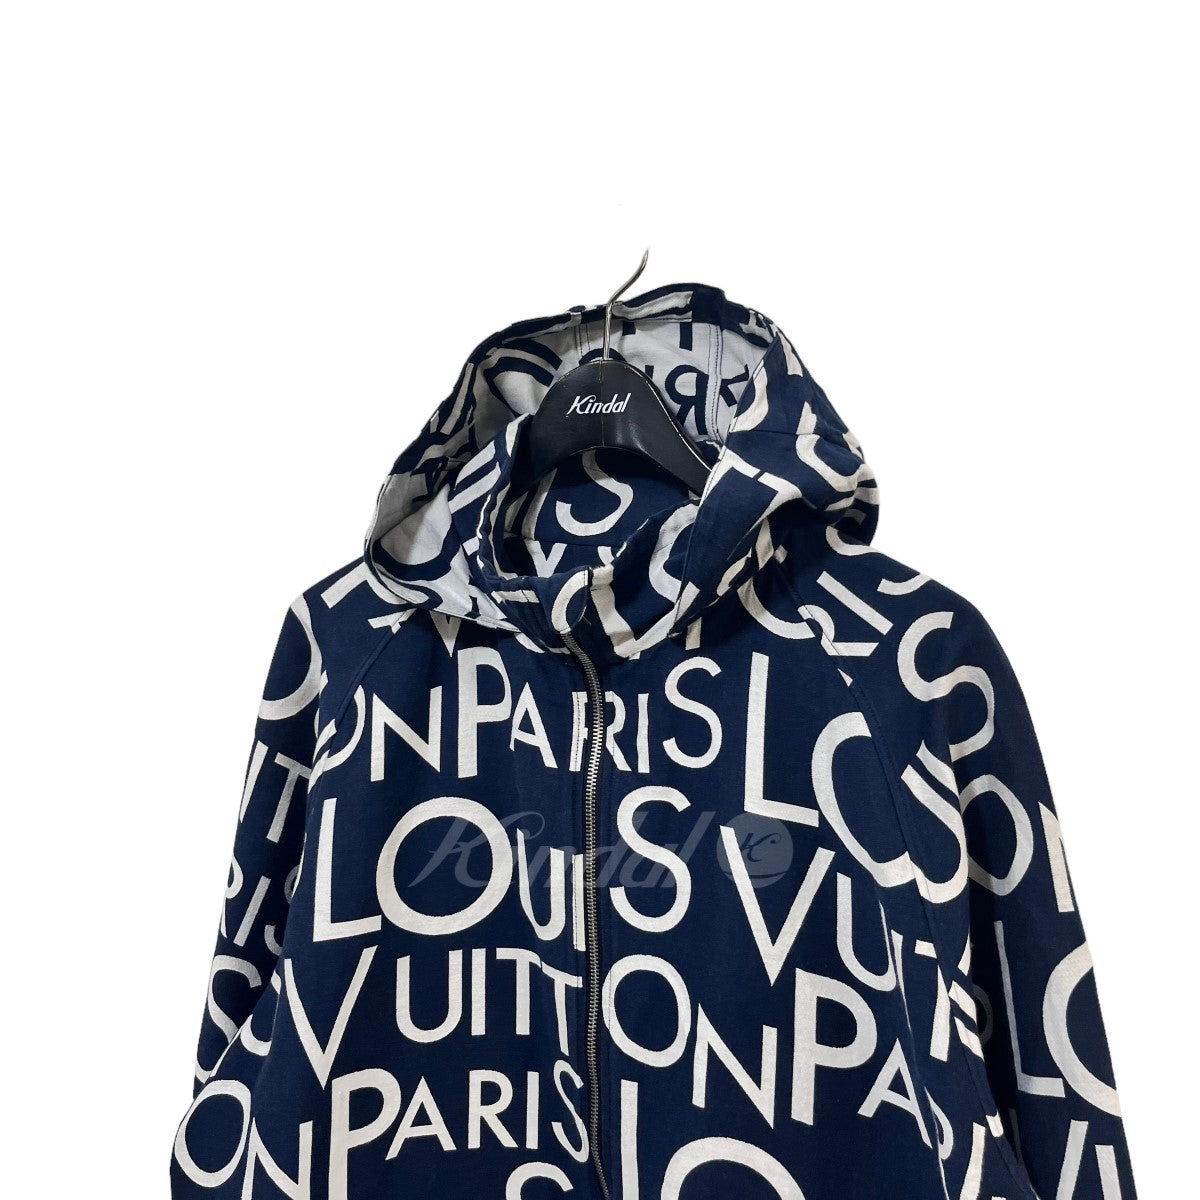 LOUIS VUITTON(ルイヴィトン) 19SS Galaxy Packable Jacket ギャラクシーパッカブルジャケット